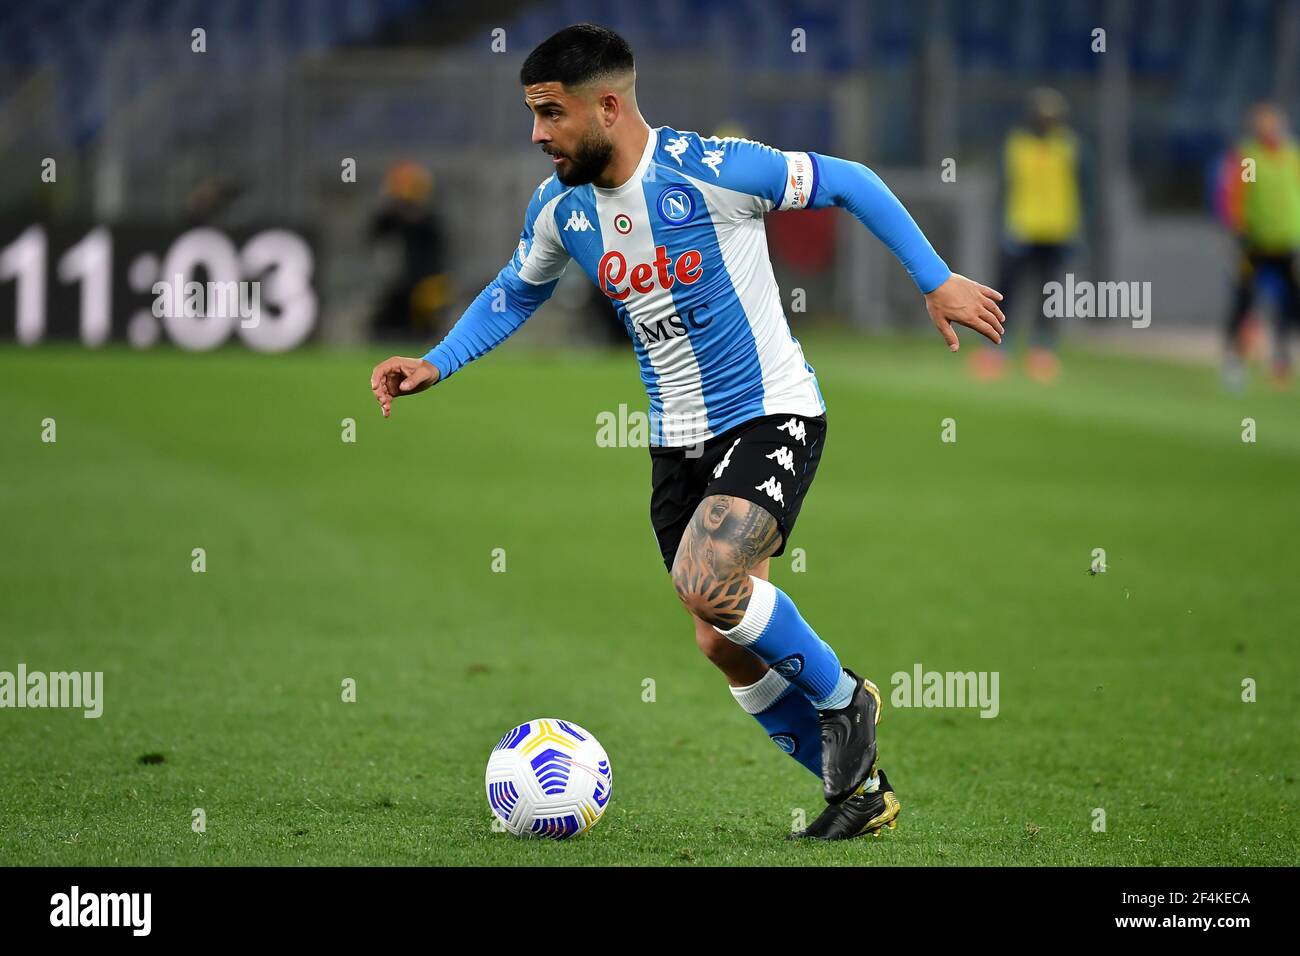 Rome, Italy. 21st Mar, 2021. Lorenzo Insigne of SSC Napoli in action during  the Serie A football match between AS Roma and SSC Napoli at Olimpico  stadium in Roma (Italy), March 21th,